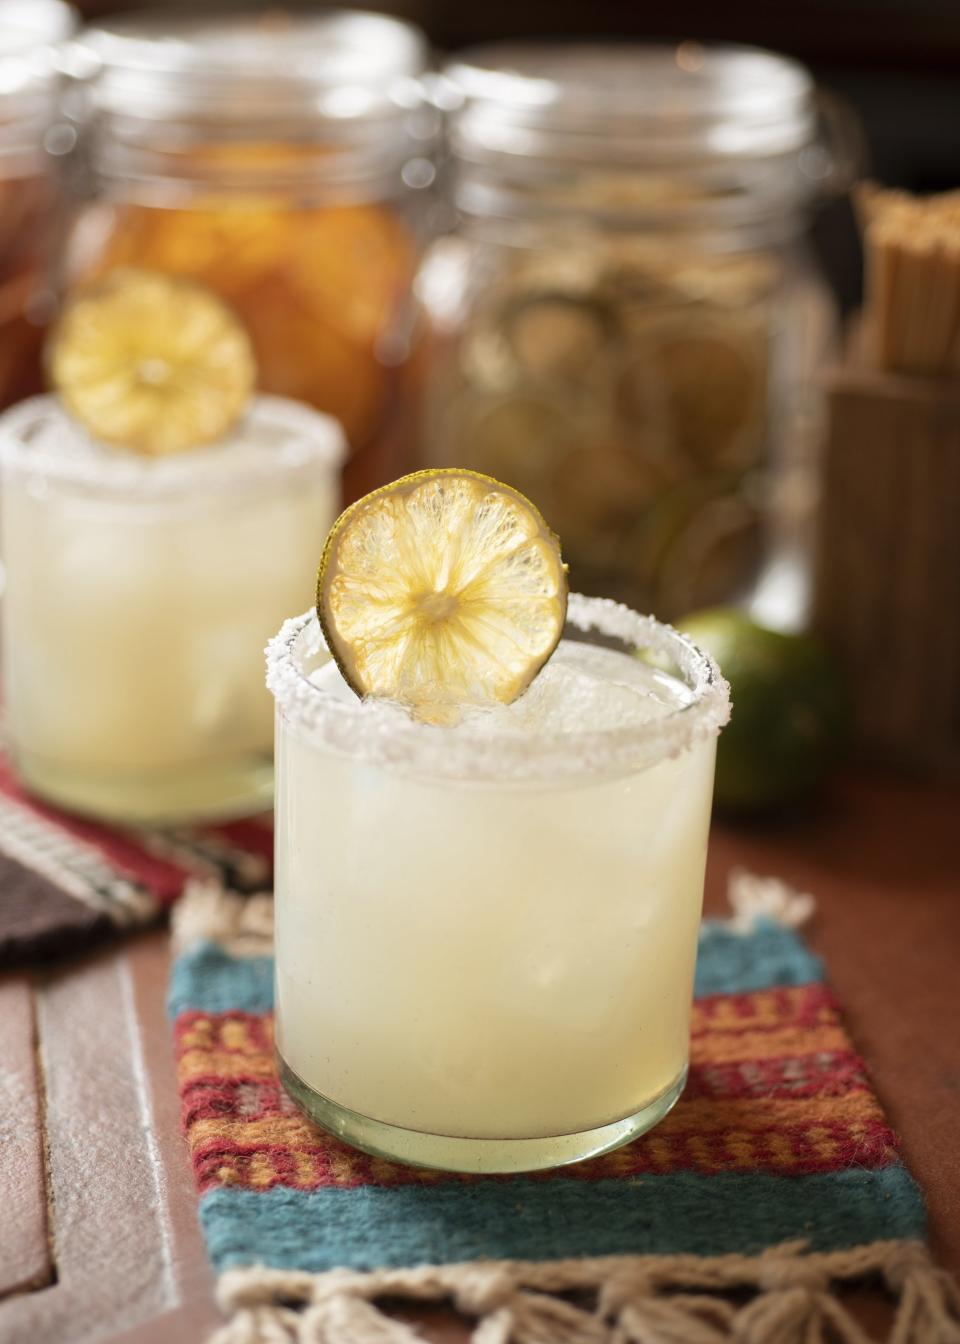 The Silver Coin margarita at the Rosewood Inn of the Anasazi is made with silver tequila and Cointreau.